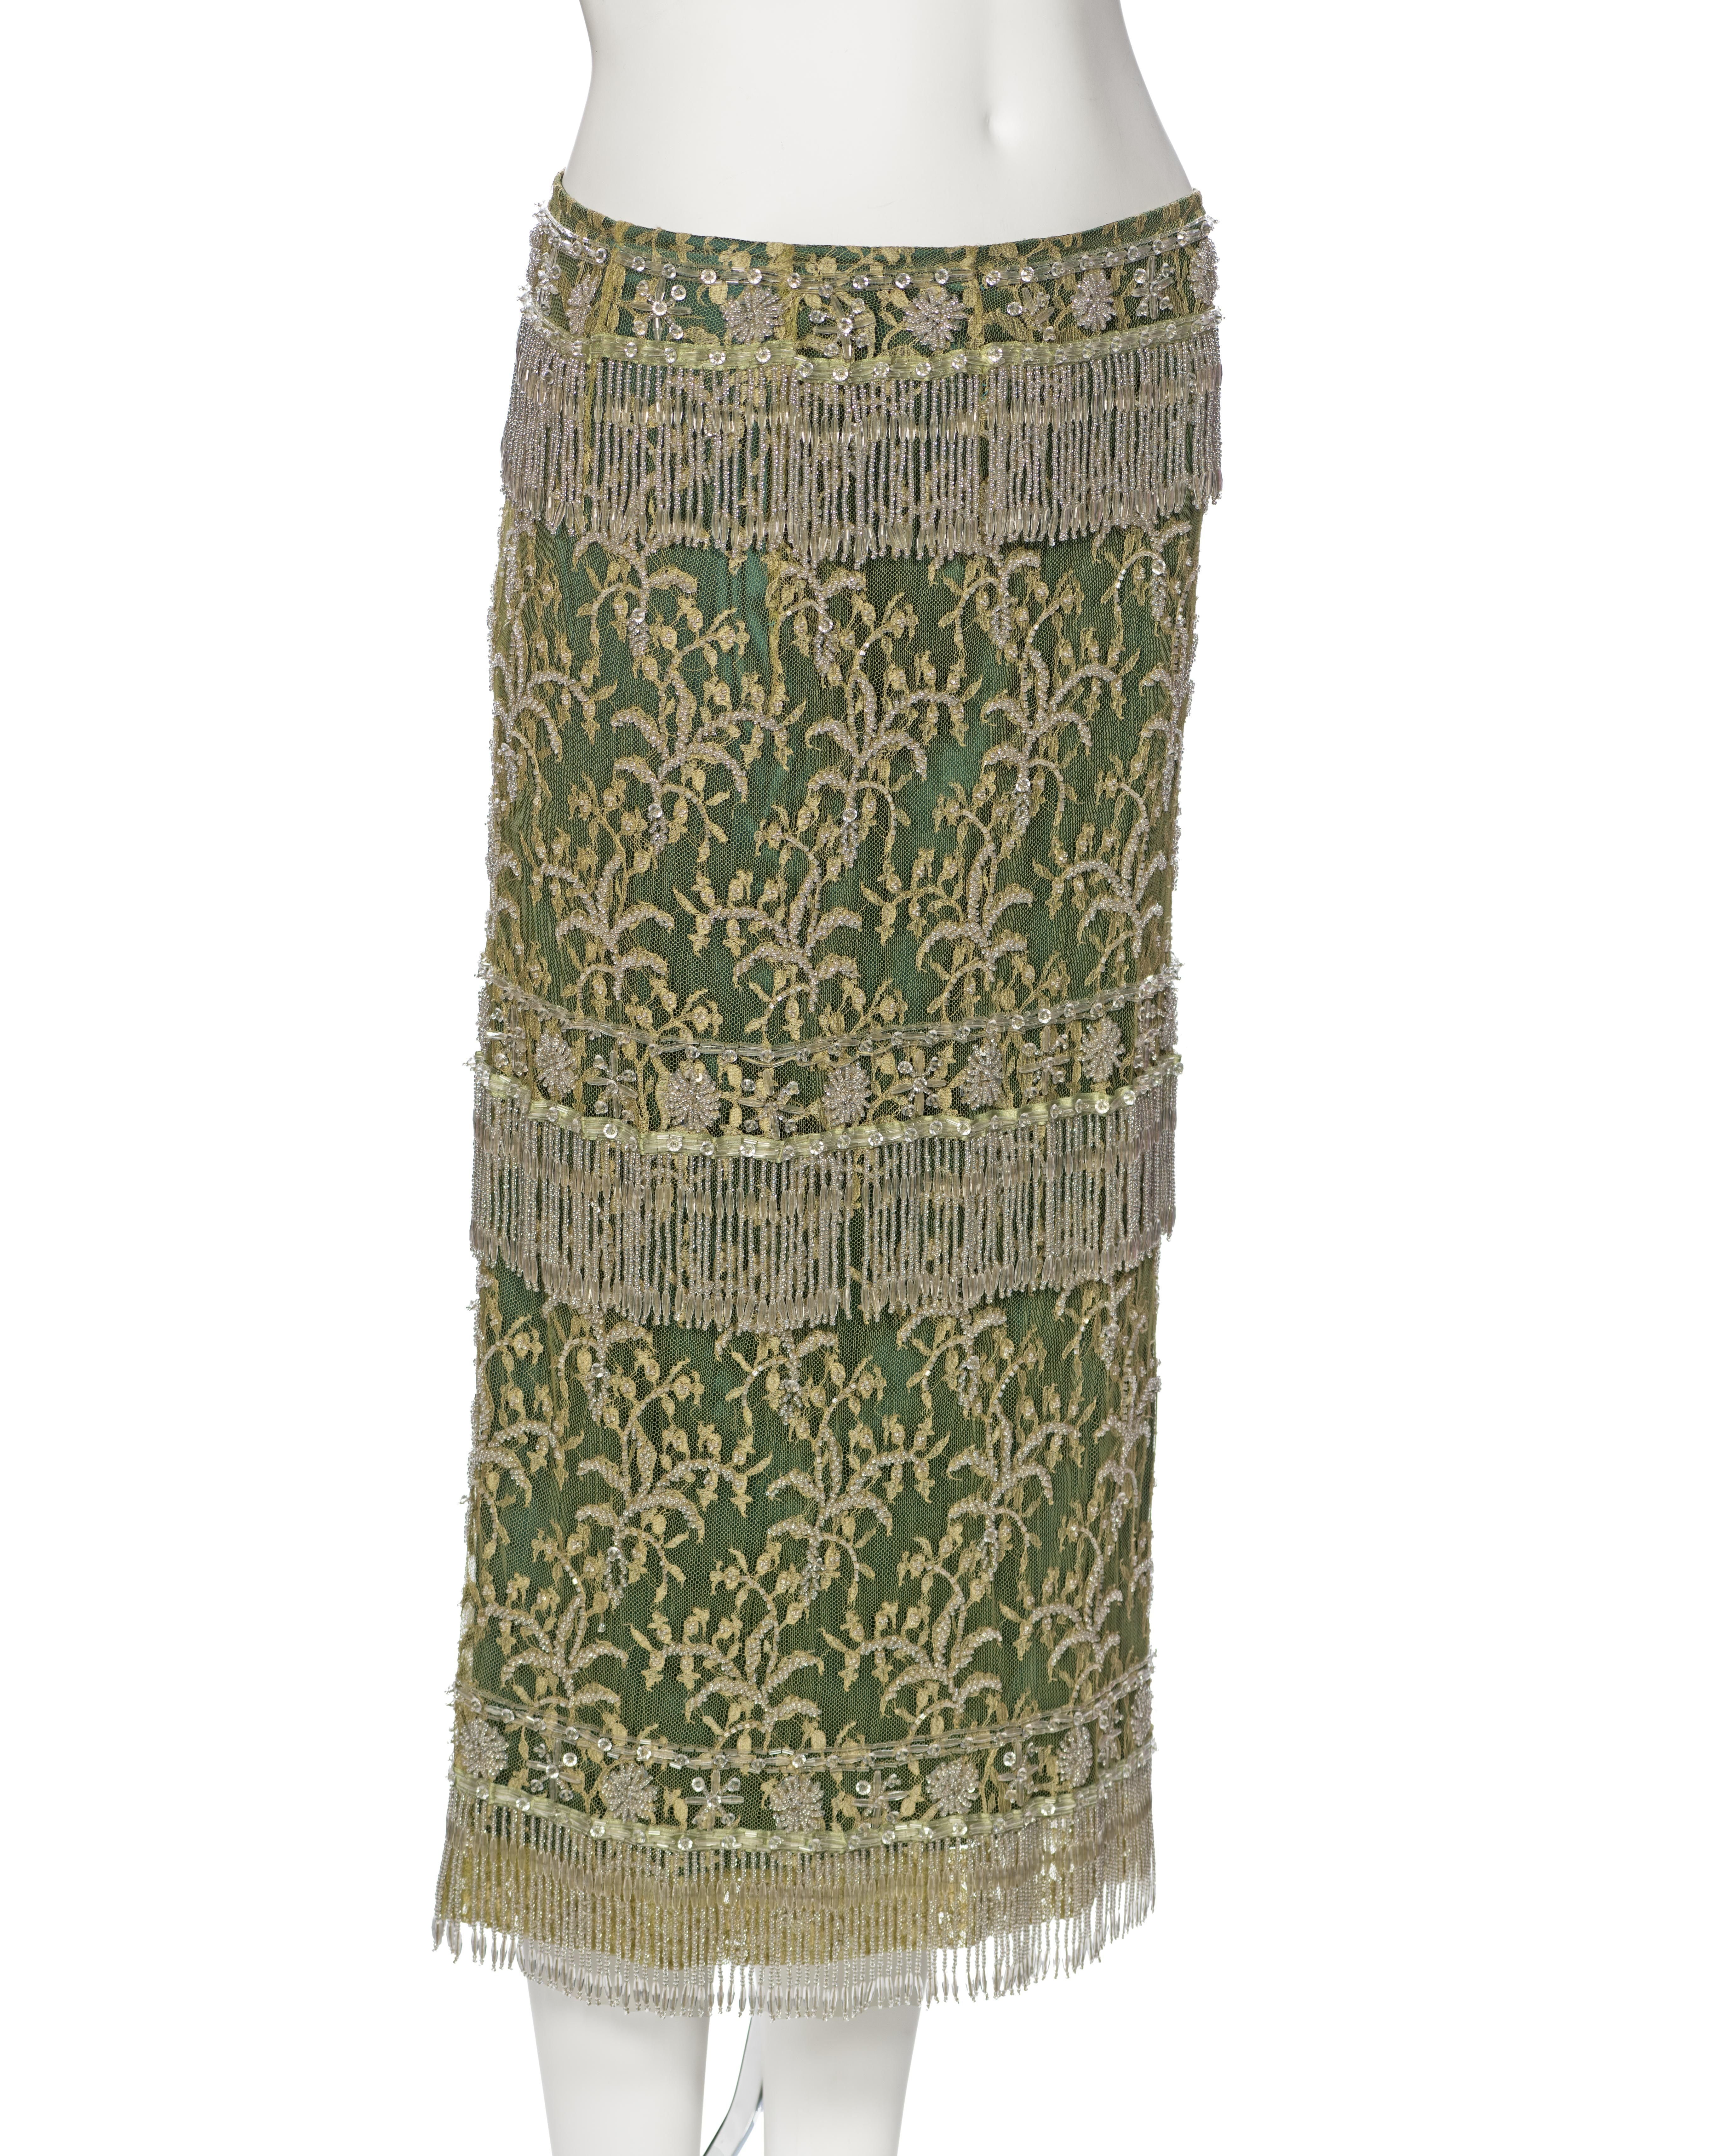 Dolce & Gabbana Beaded Chartreuse Lace Evening Skirt, ss 2000 For Sale 5